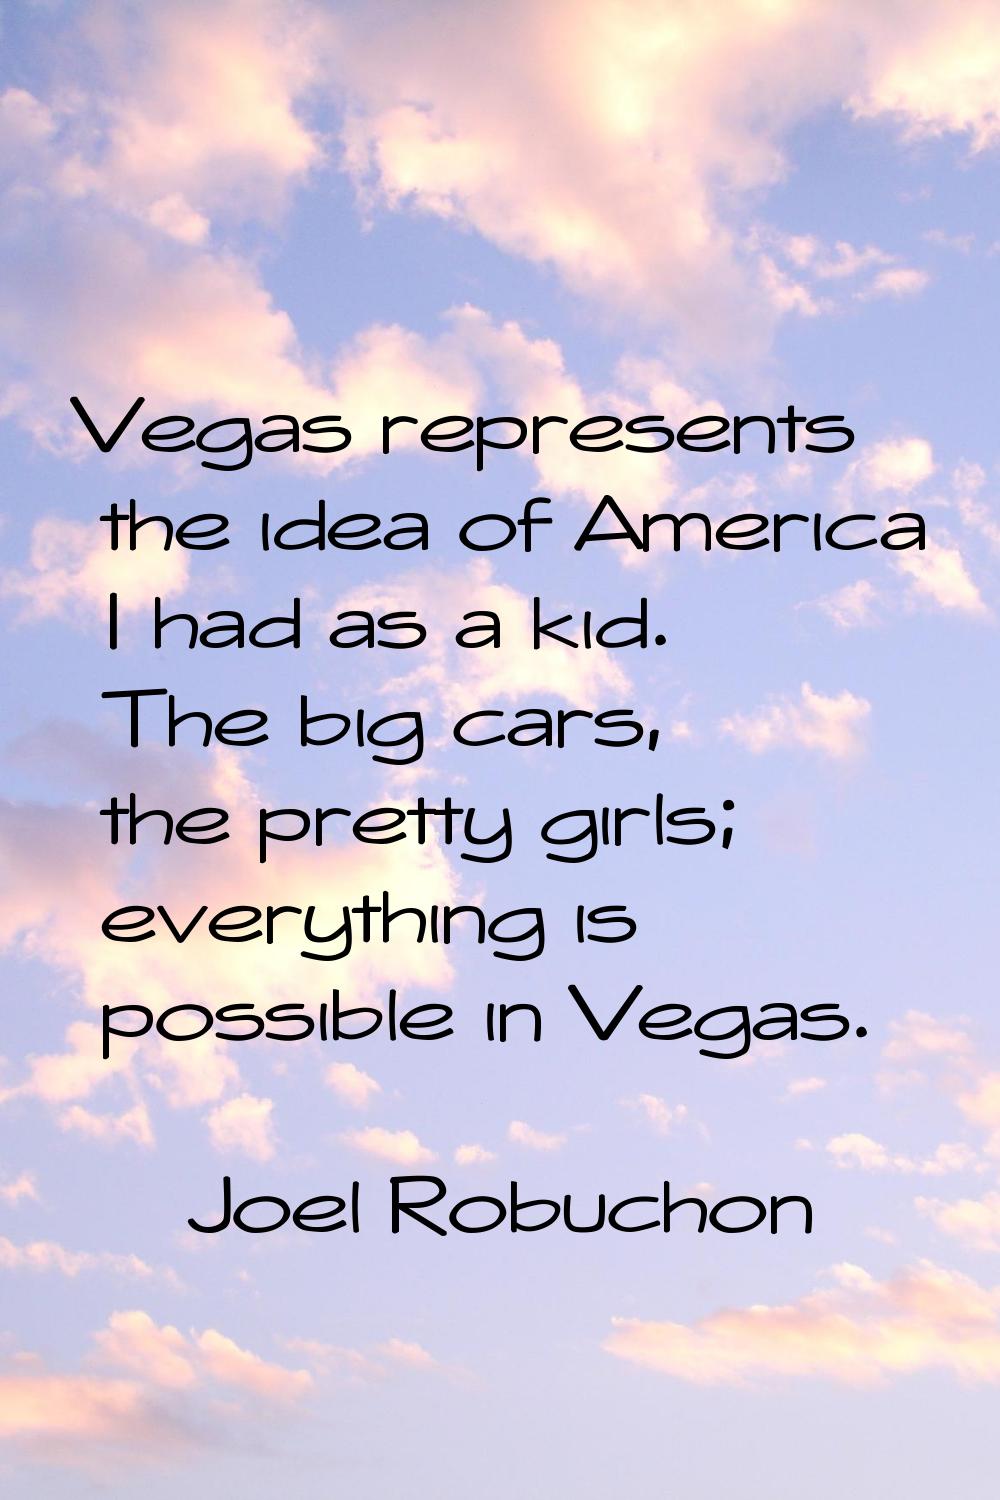 Vegas represents the idea of America I had as a kid. The big cars, the pretty girls; everything is 